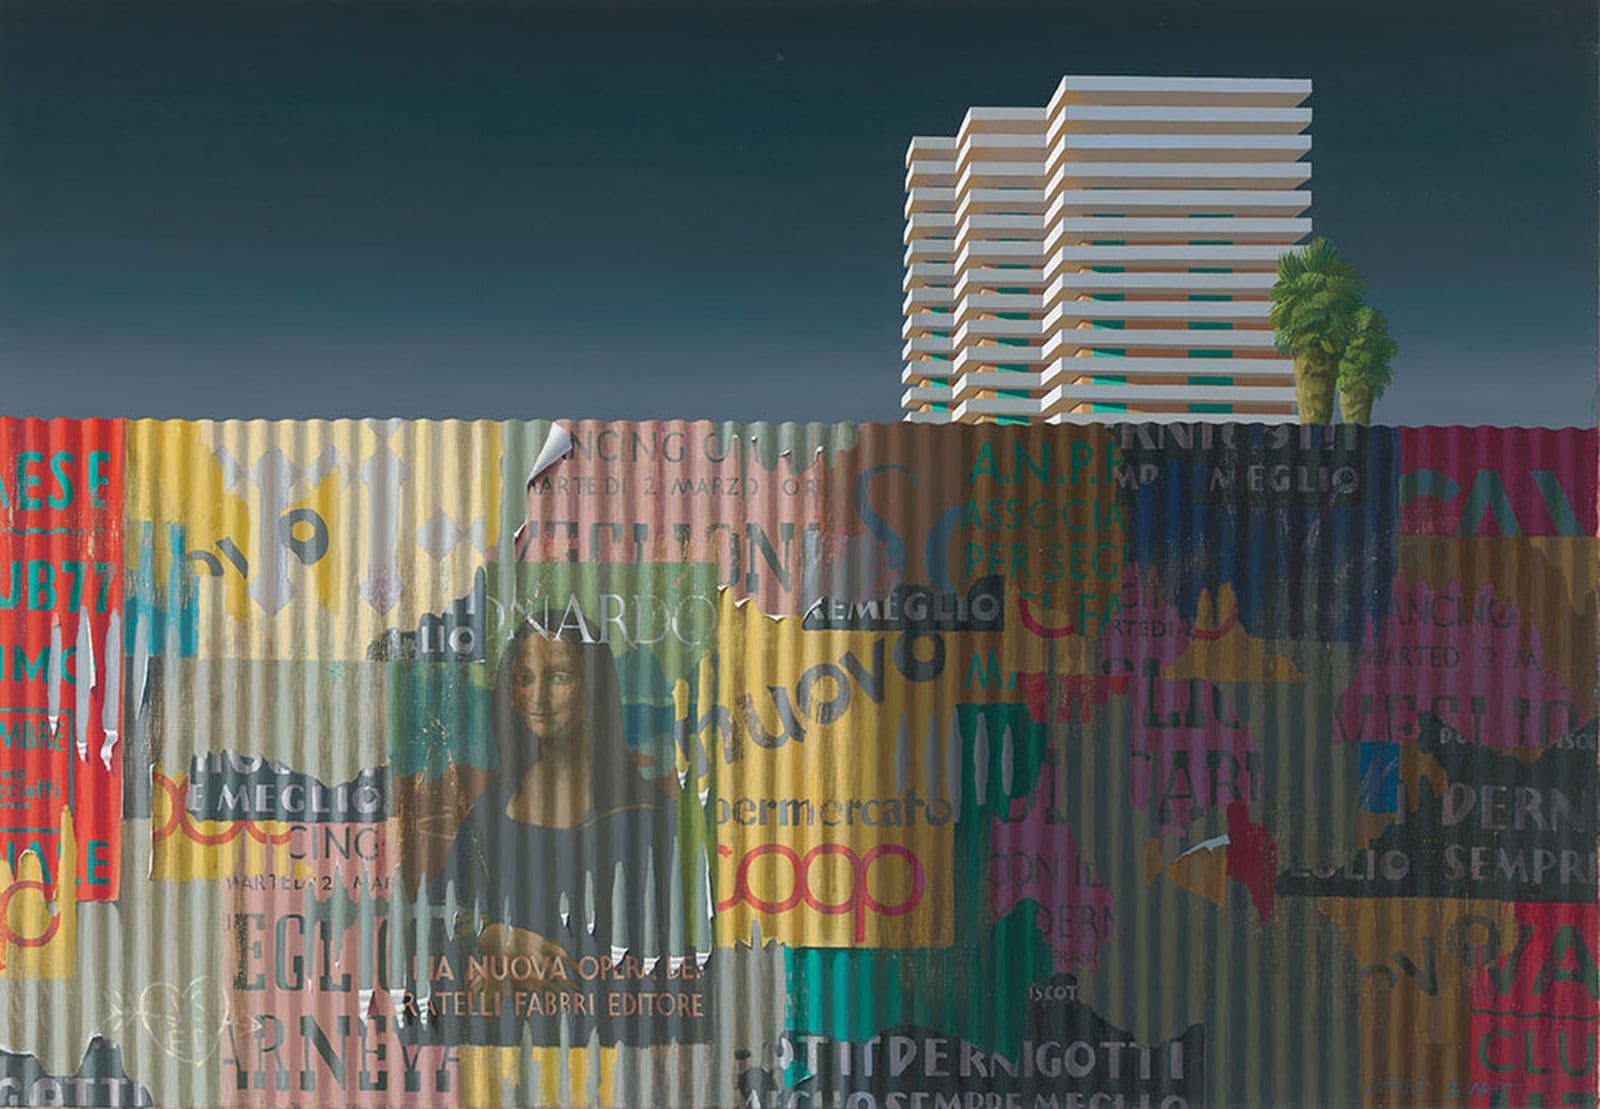 A painting depicting the Mona Lisa on a corrugated iron fence